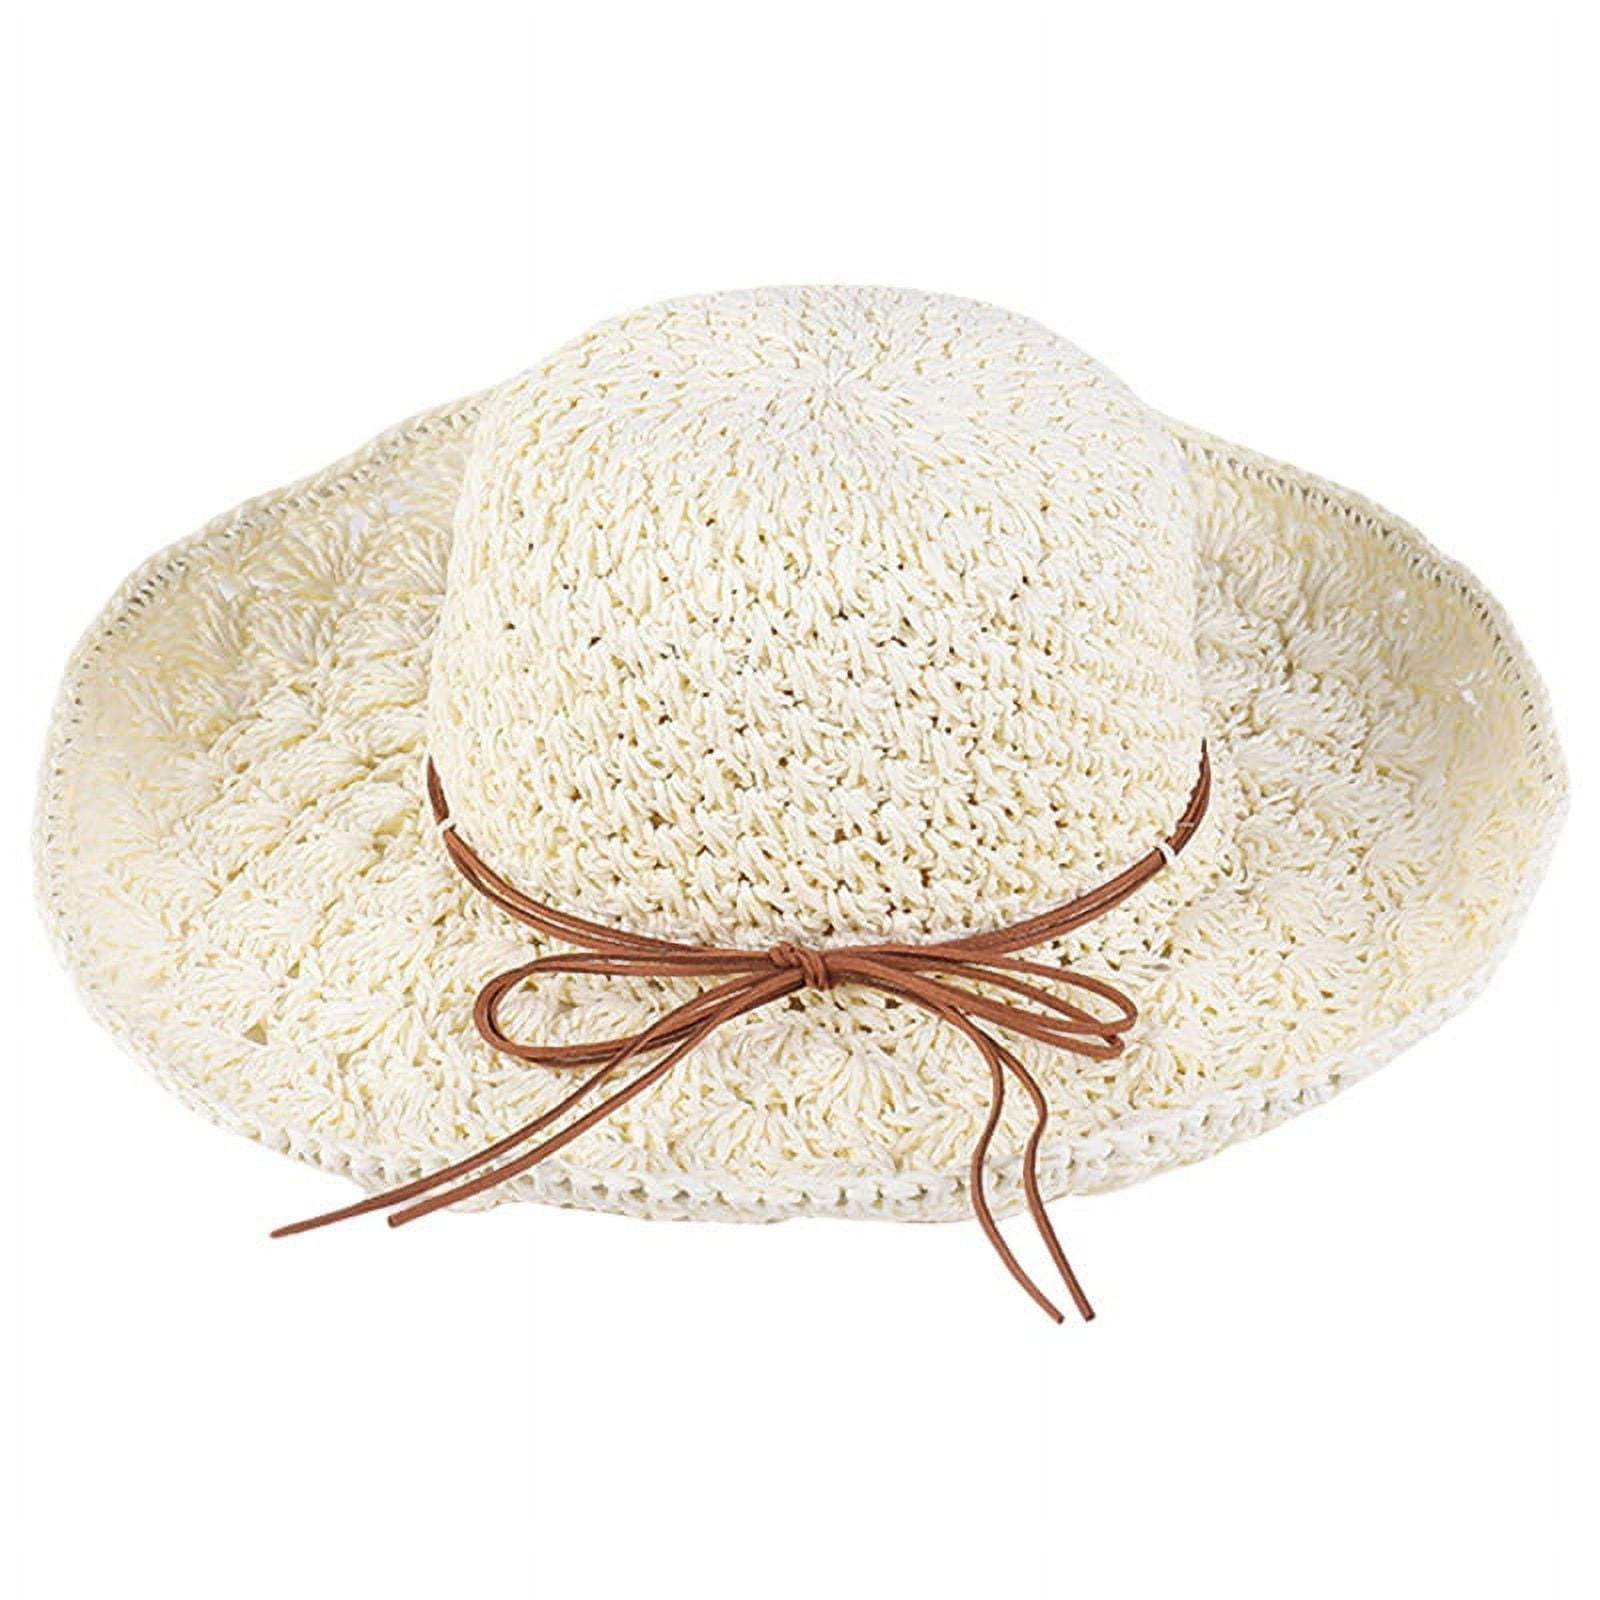 Foldable Straw Sun Hats 2022 With Wide Brim For Anti UV Protection  Fashionable Sun Cap For Women And Men From Gingermilkk, $23.1